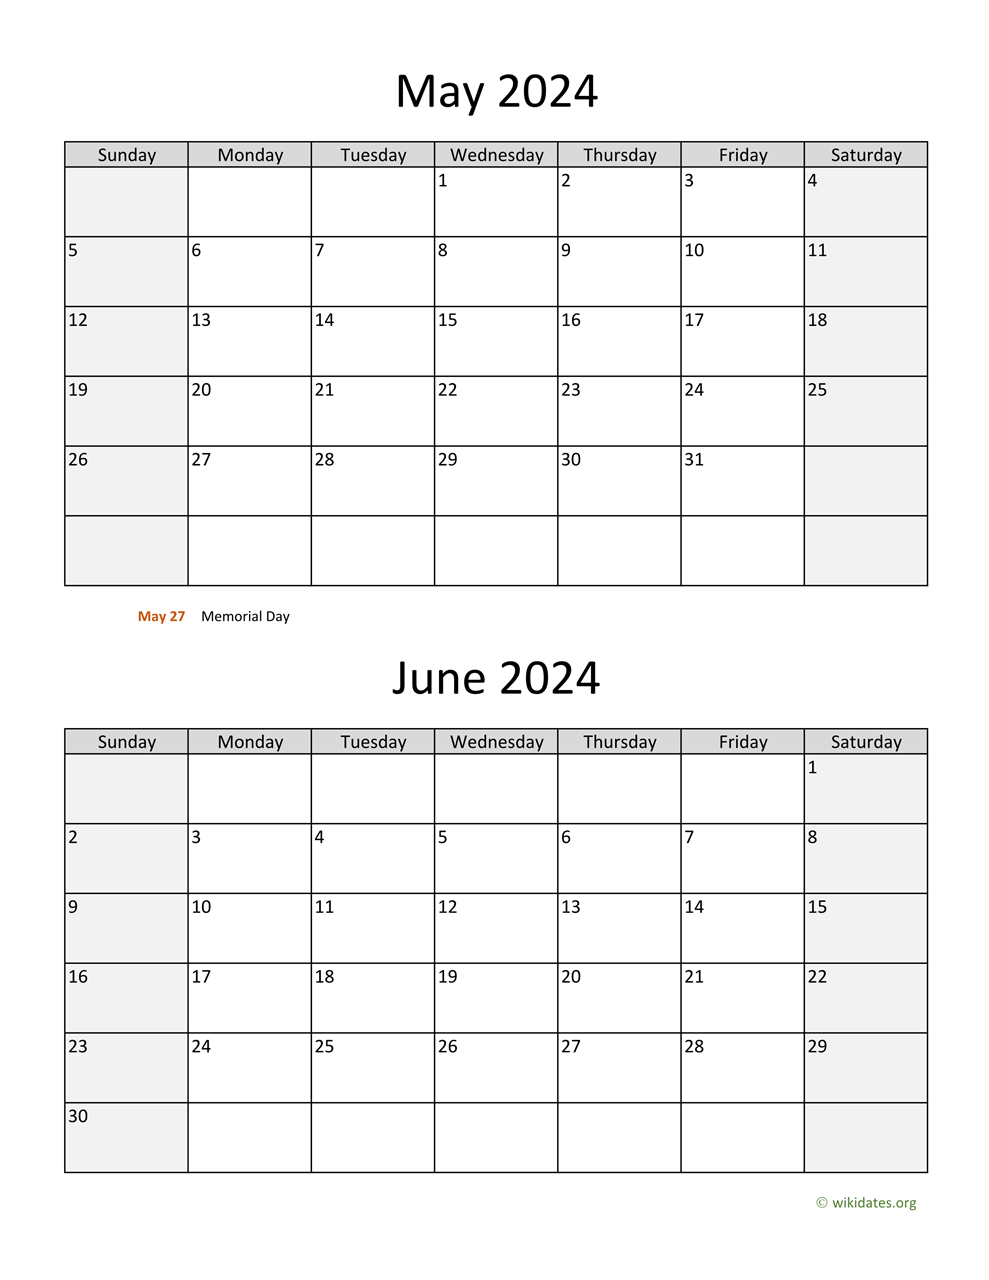 May And June 2024 Calendar | Wikidates for Printable Monthly Calendar May And June 2024